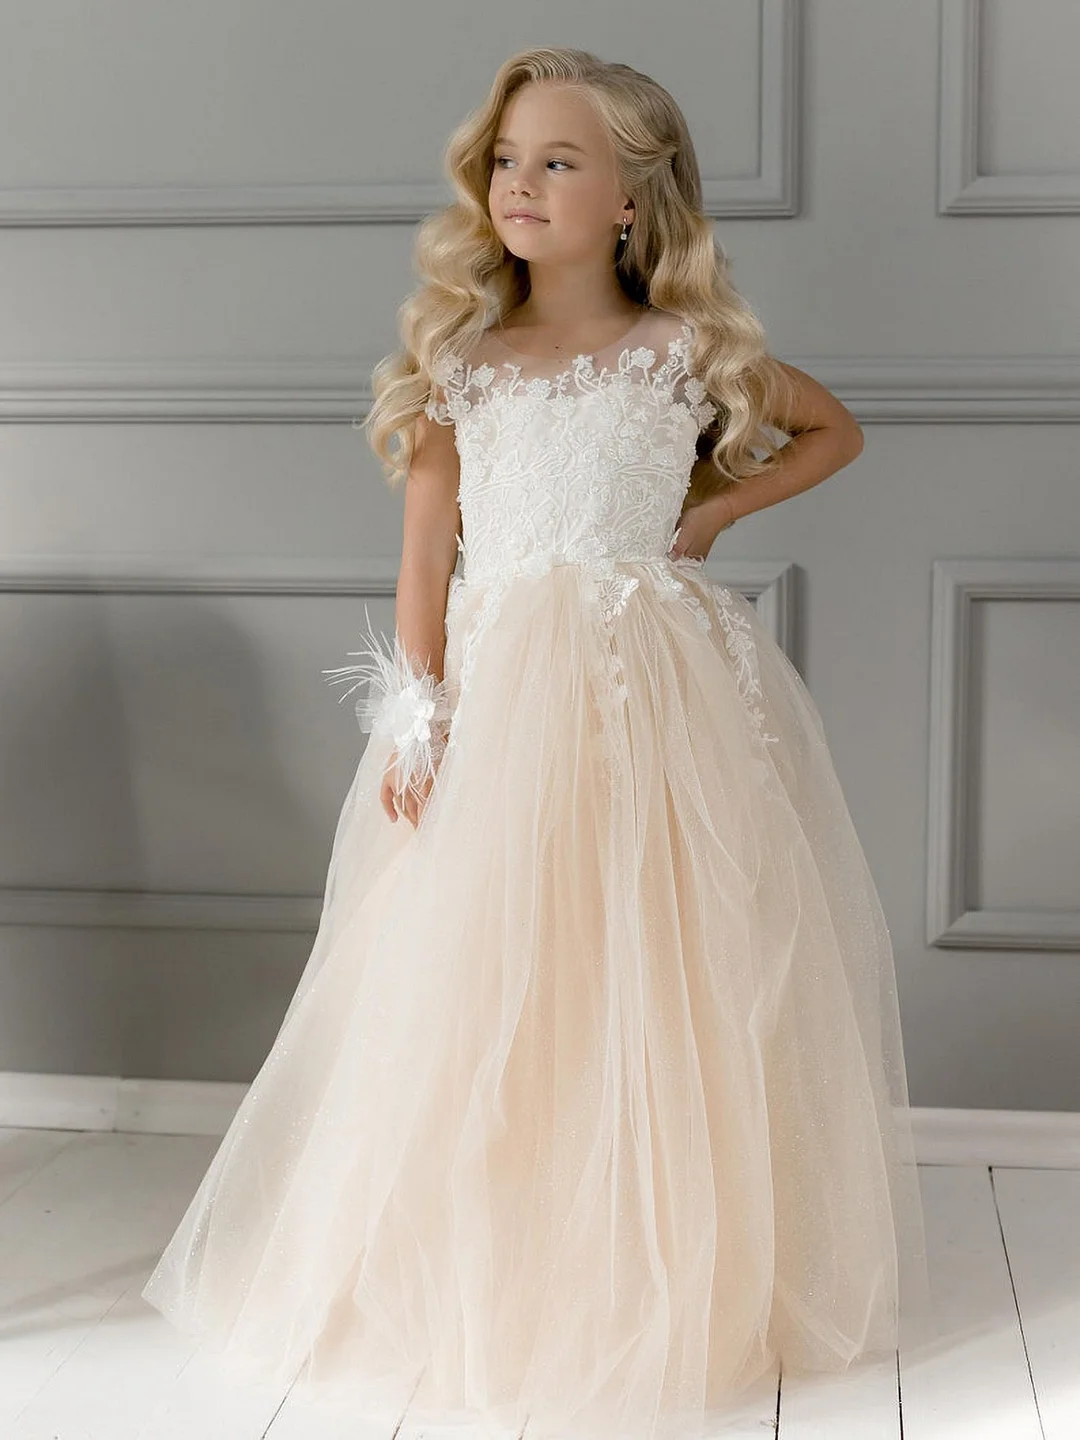 Daisda Simple Sleeveless A-line Flower Girl Dresses Tulle with Appliques Lace Pearls